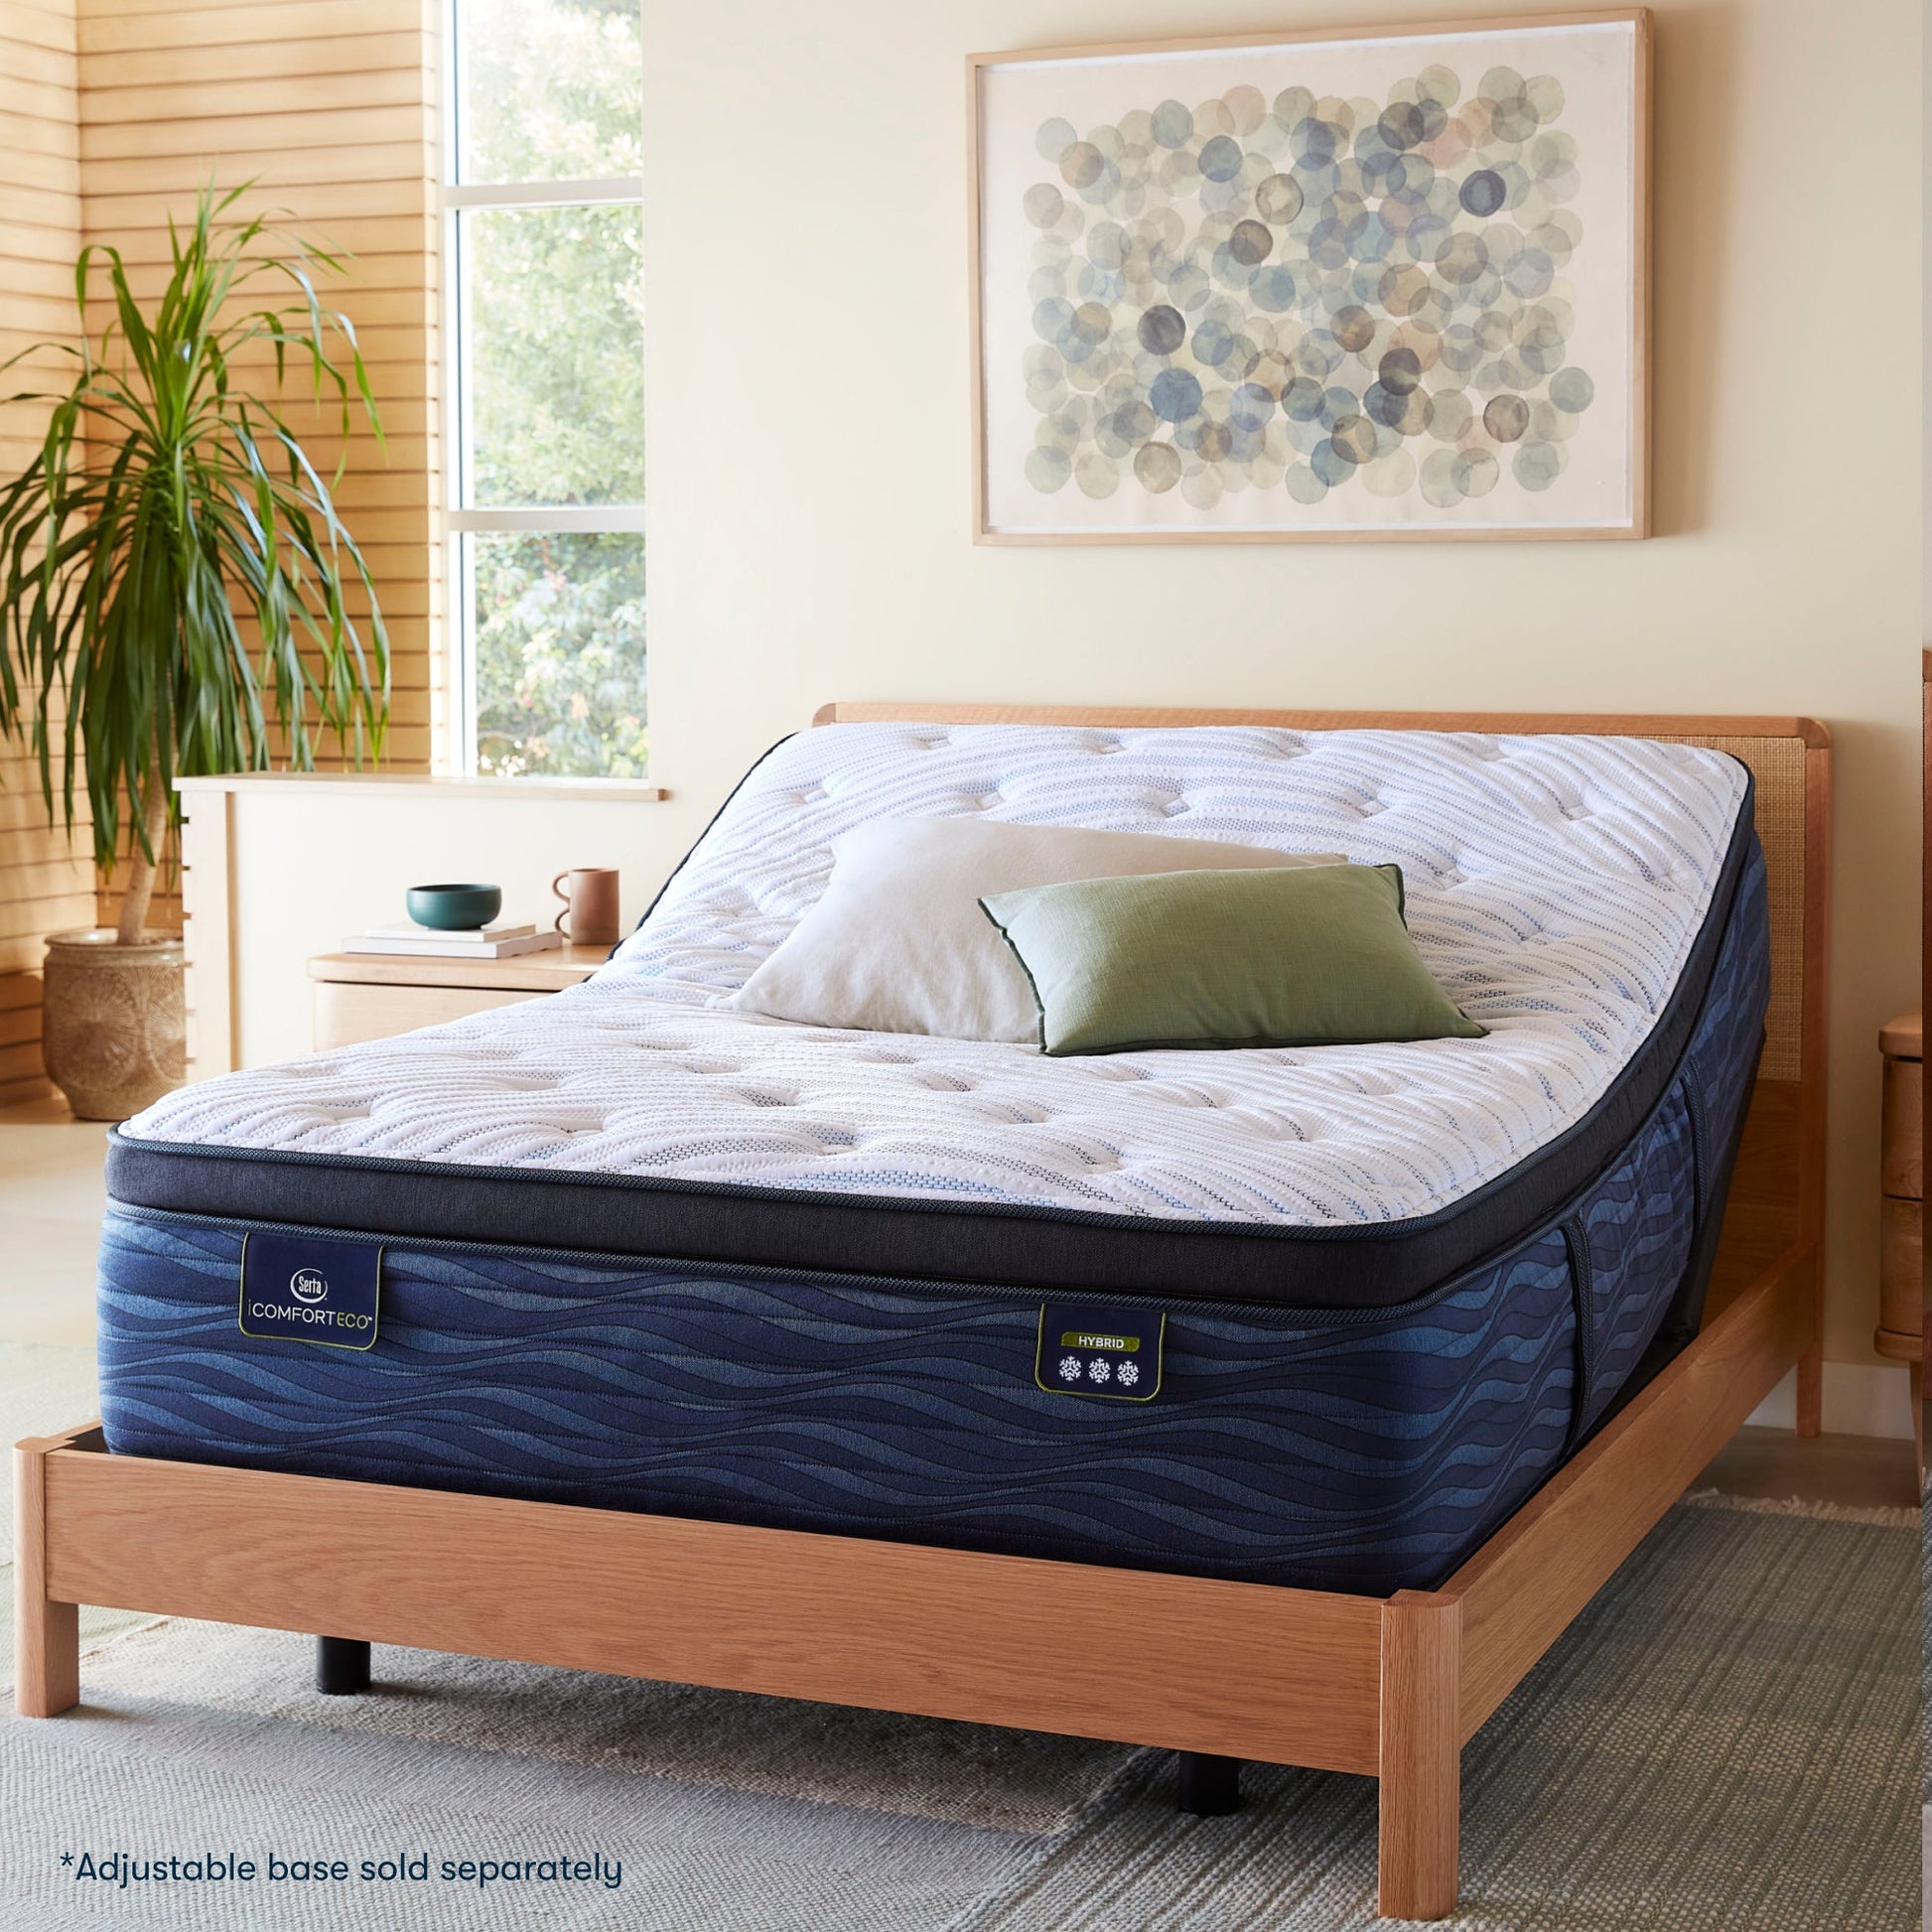 Serta iComfortECO Quilted Hybrid Firm Pillow Top Mattress On Adjustable Base